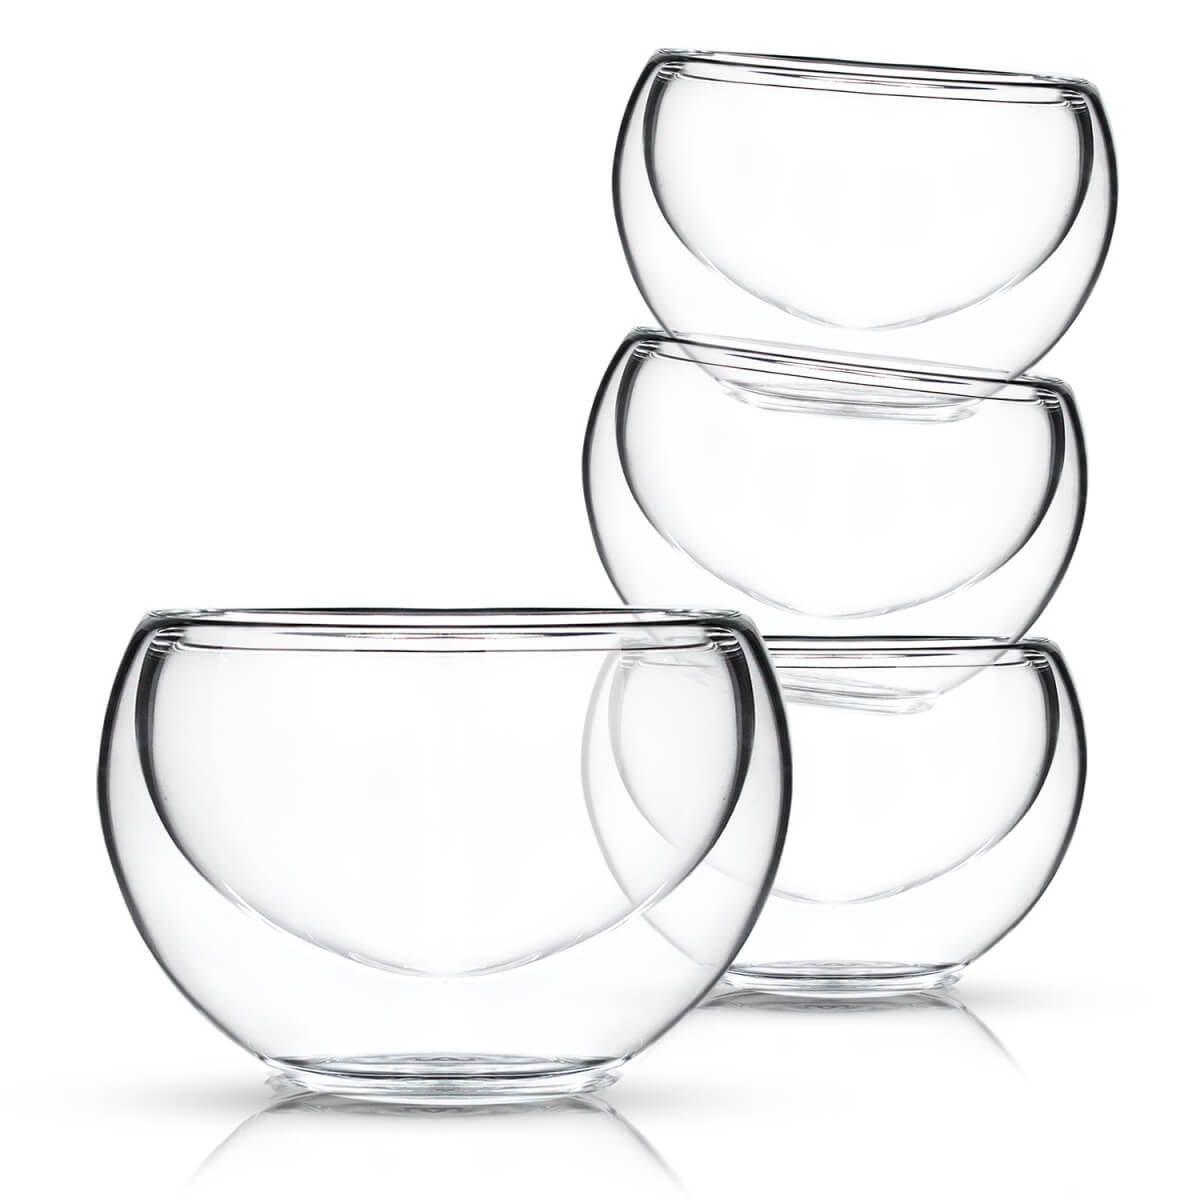 2 Double Walled Glass Tea Cups & Saucers